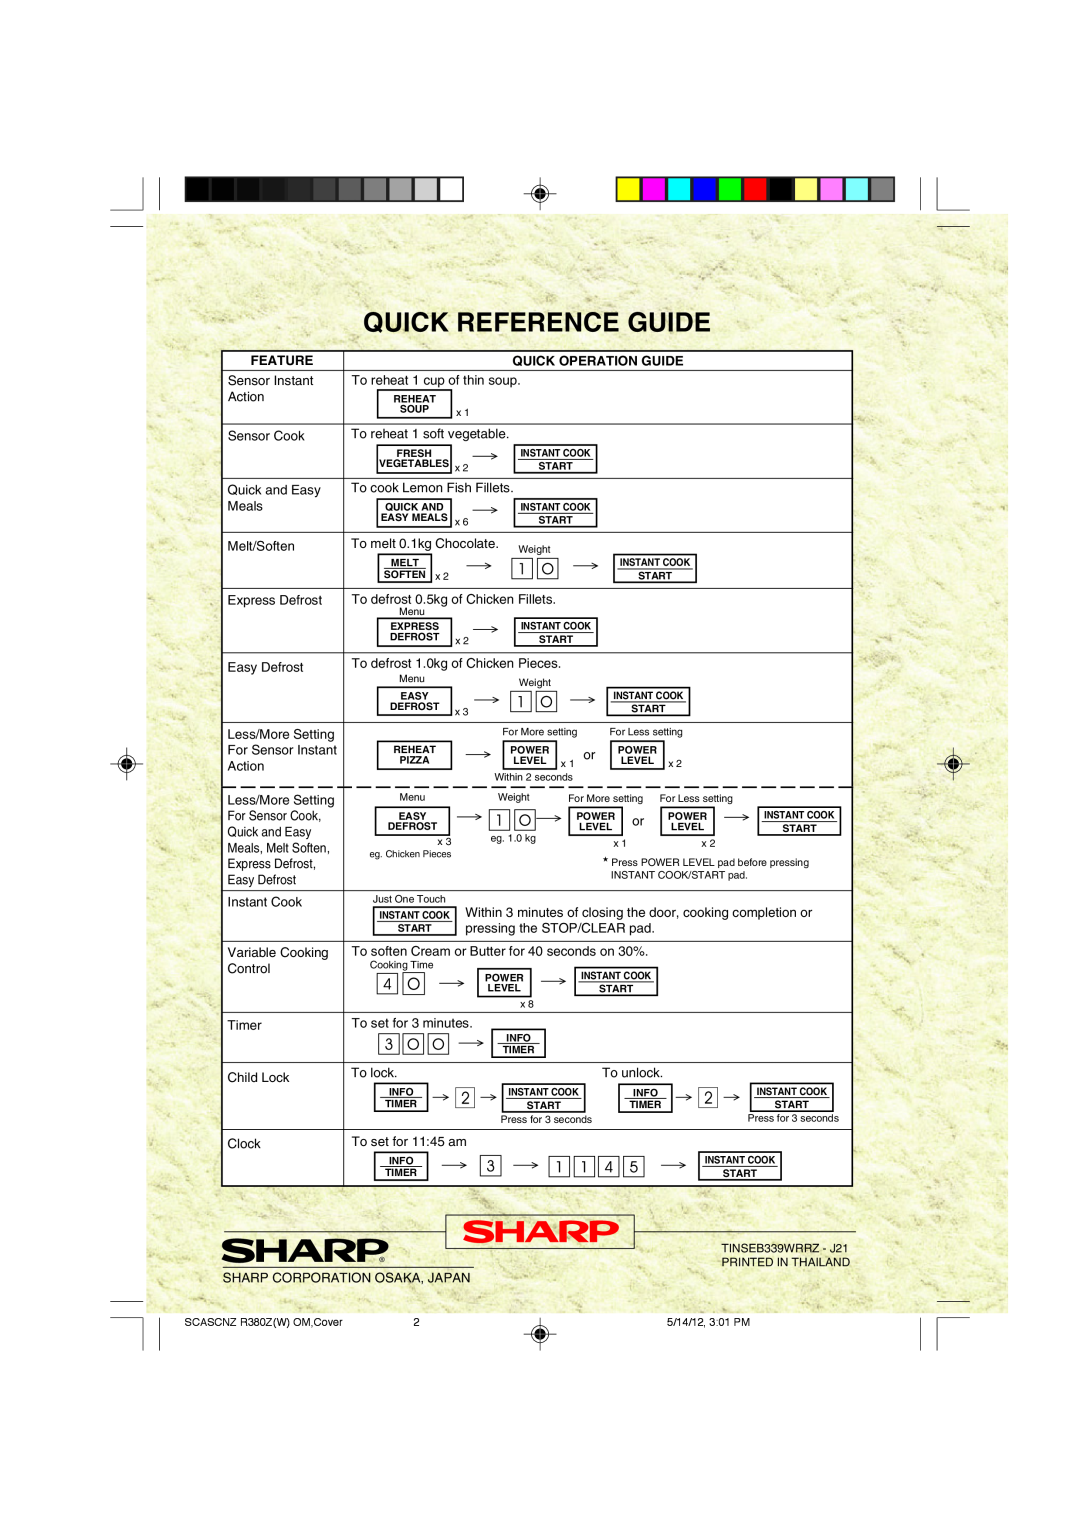 Sharp R-380Z(W) operation manual Quick Reference Guide, Feature, Quick Operation Guide 